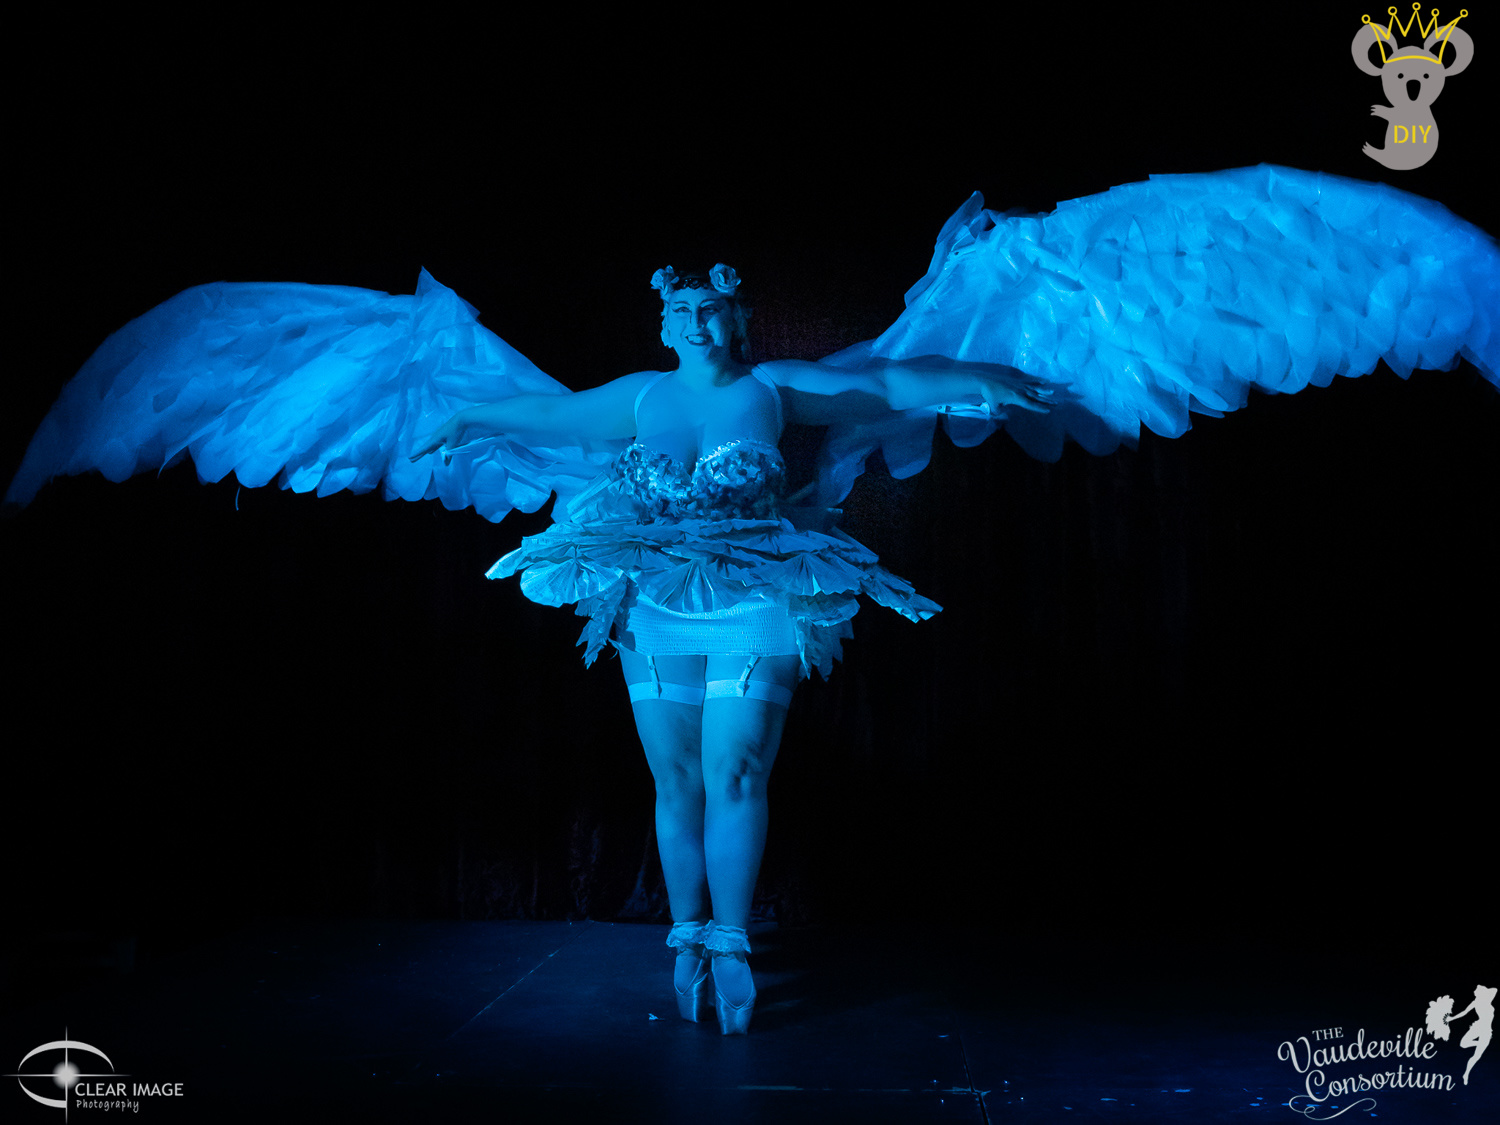 Lydia Grim in her DIY BurlesKoala costume with outstretched articulated wings